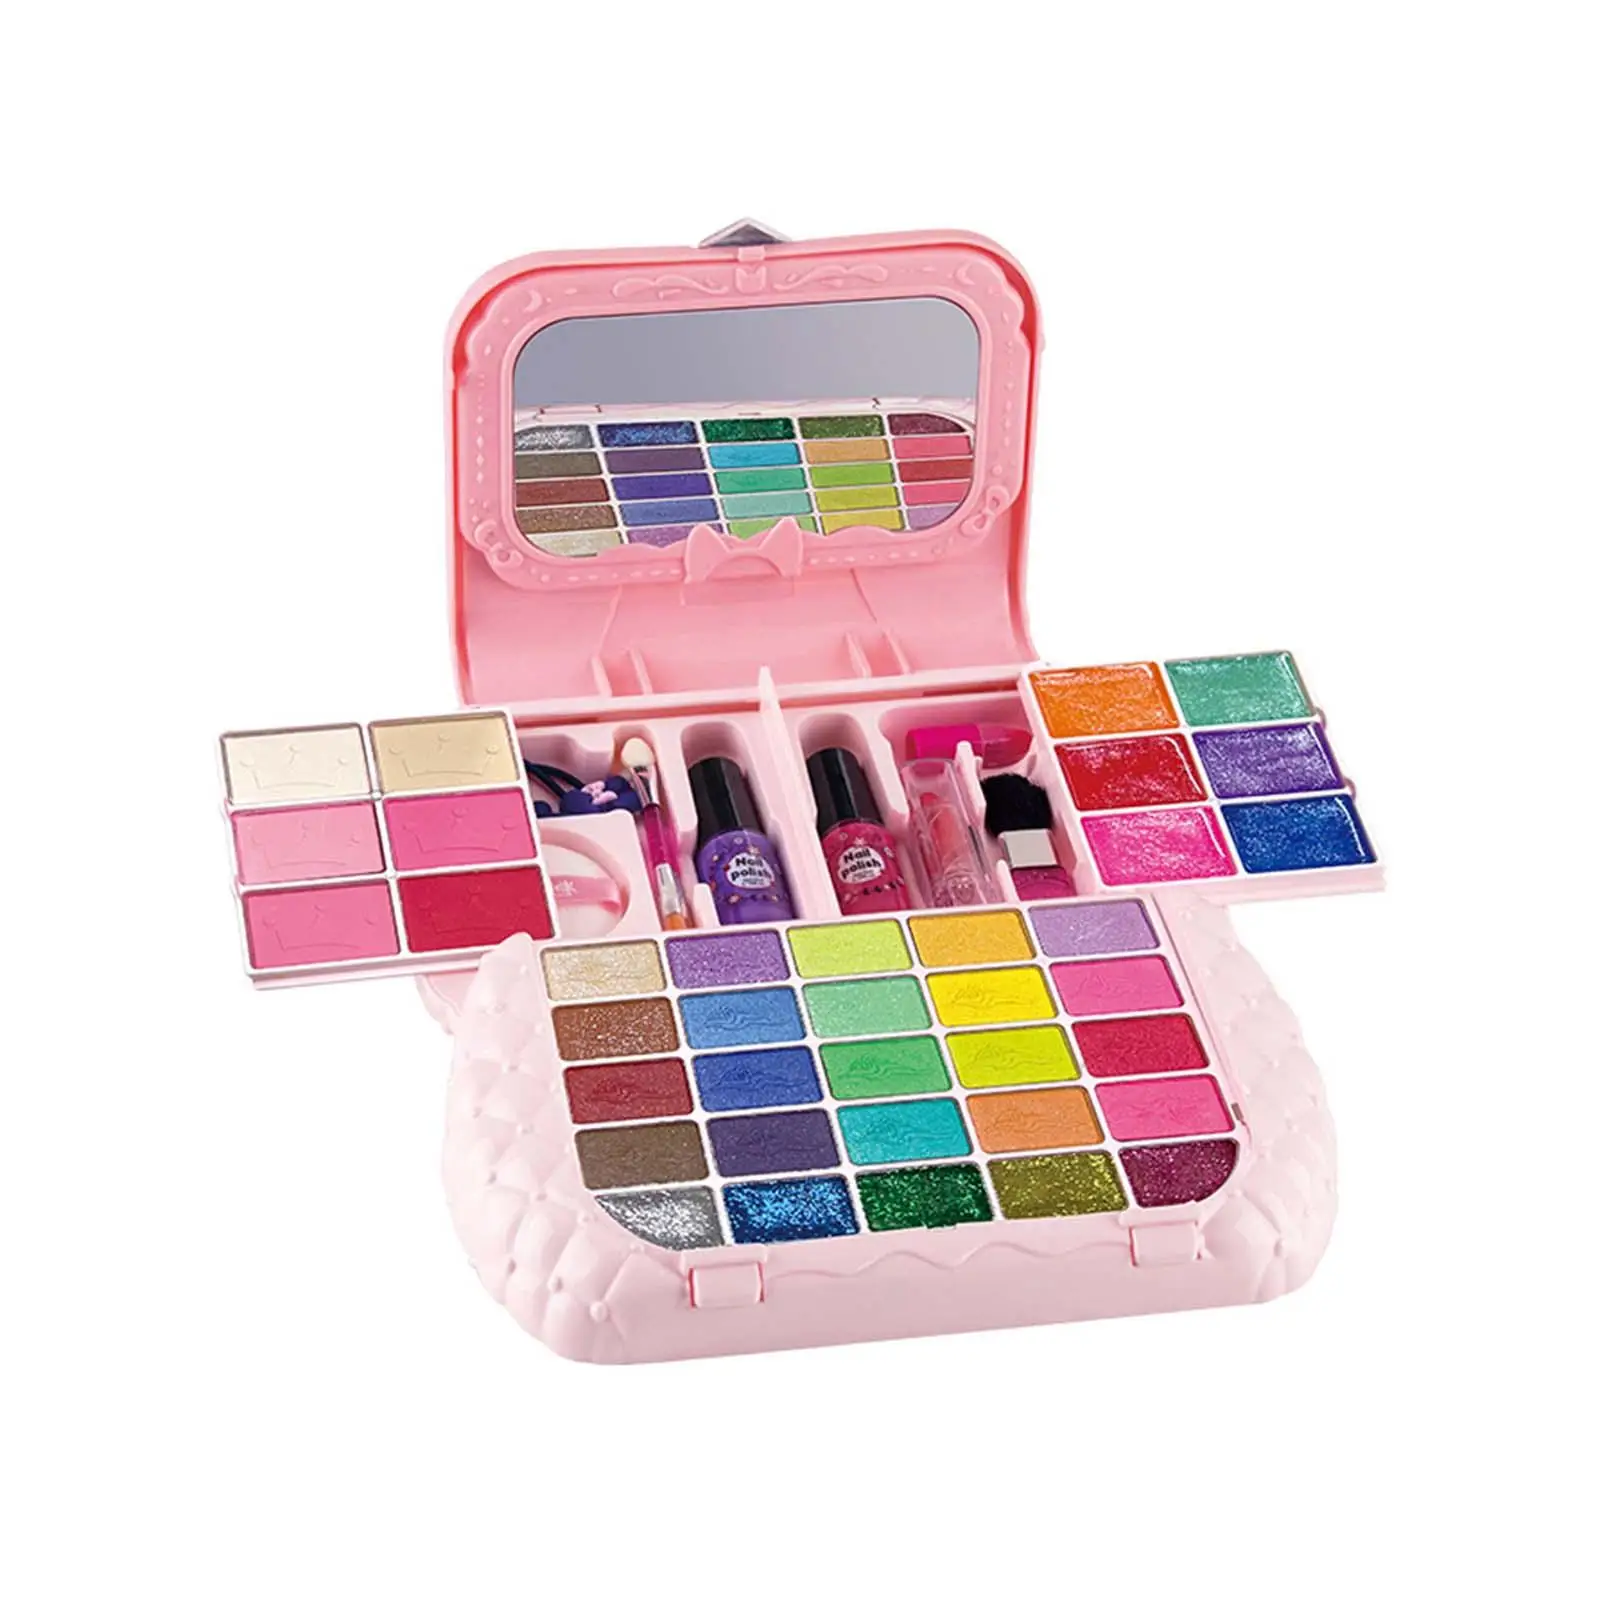 Makeup Toy Kits Role Playing with Cosmetic Case Washable Makeup Girls Toys for Age 3 4 5+ Toddlers Girls Present Gift Halloween